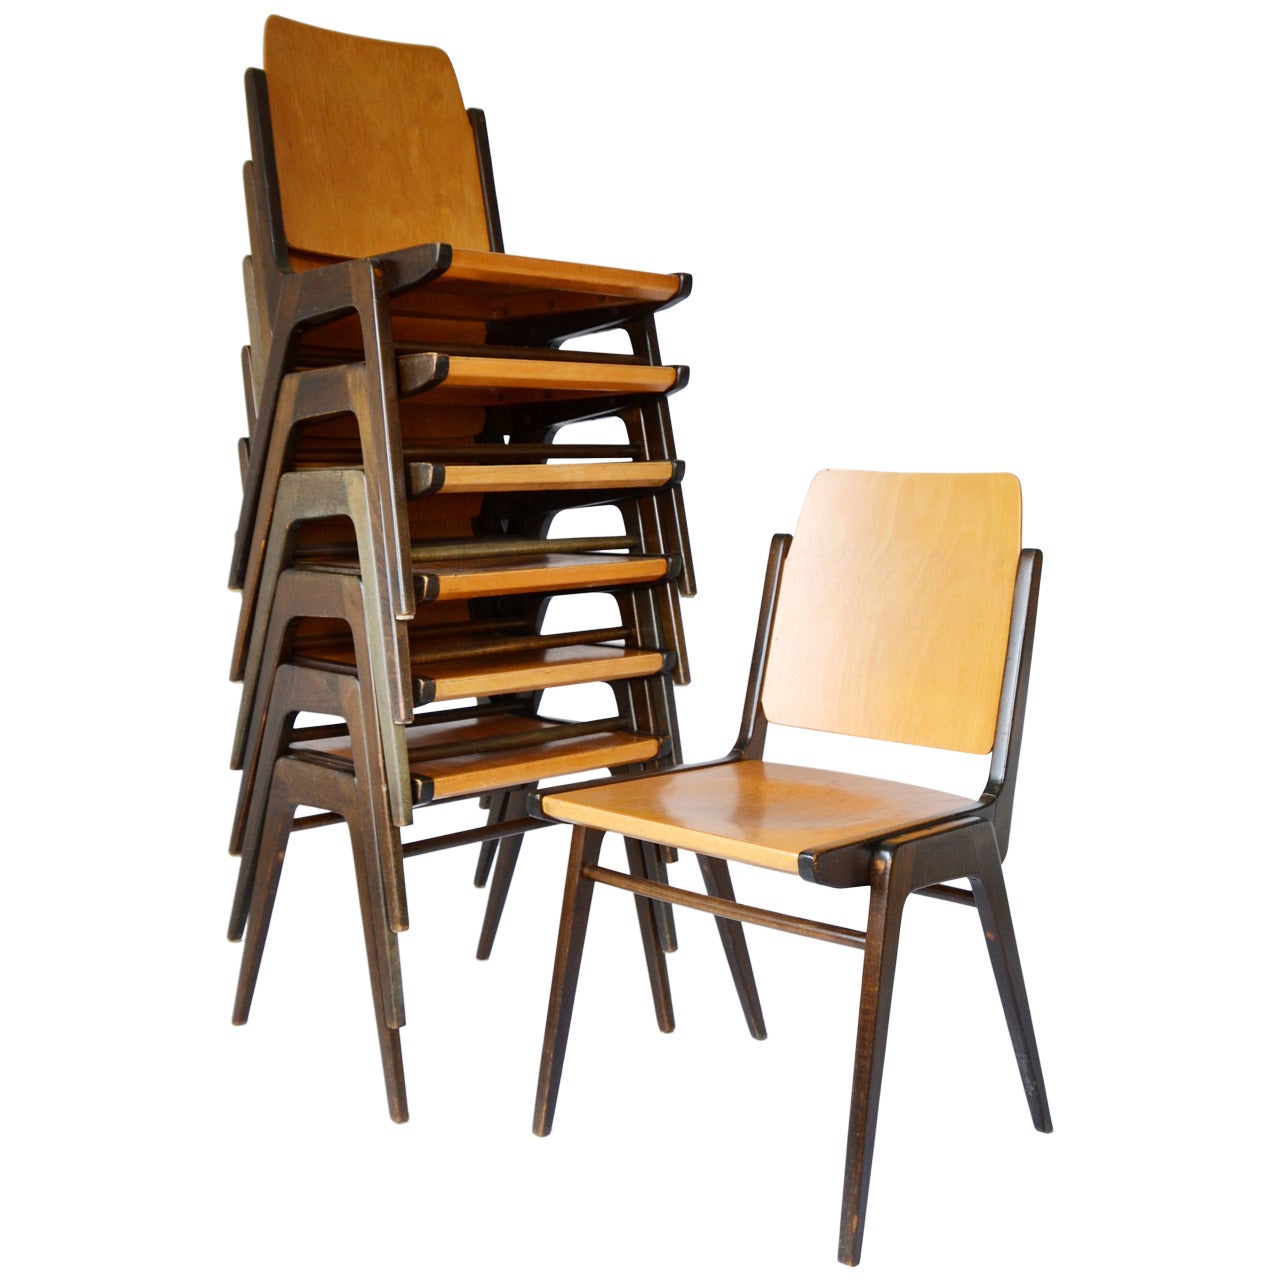 One of twelve bicolored stacking chairs designed by Austrian architect Franz Schuster manufactured by Wiesner-Hager in Mid-Century, circa 1960 (late 1950s or early 1960s).
This chair was designed by Franz Schuster for the Stadtpark-Forum Graz in